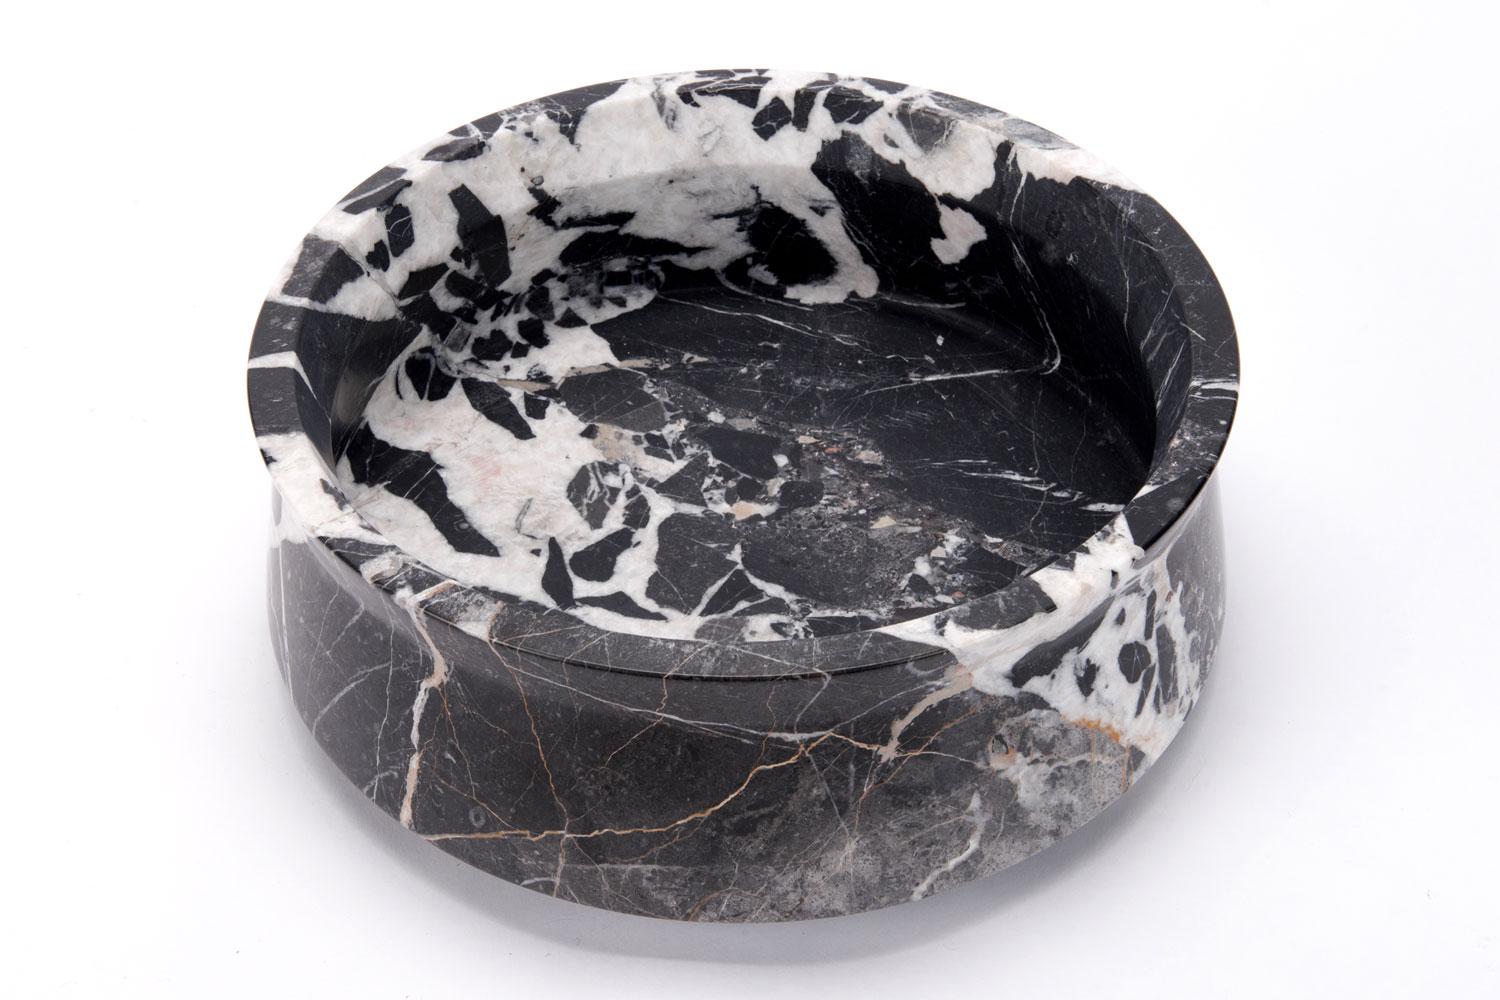 Patterned black and white marble bowl with engraved date and number is hand carved by French artist Gilles Caffier.

Renowned for his unique and limited edition pieces, Gilles Caffier creates topical textures and transforms them into exquisite